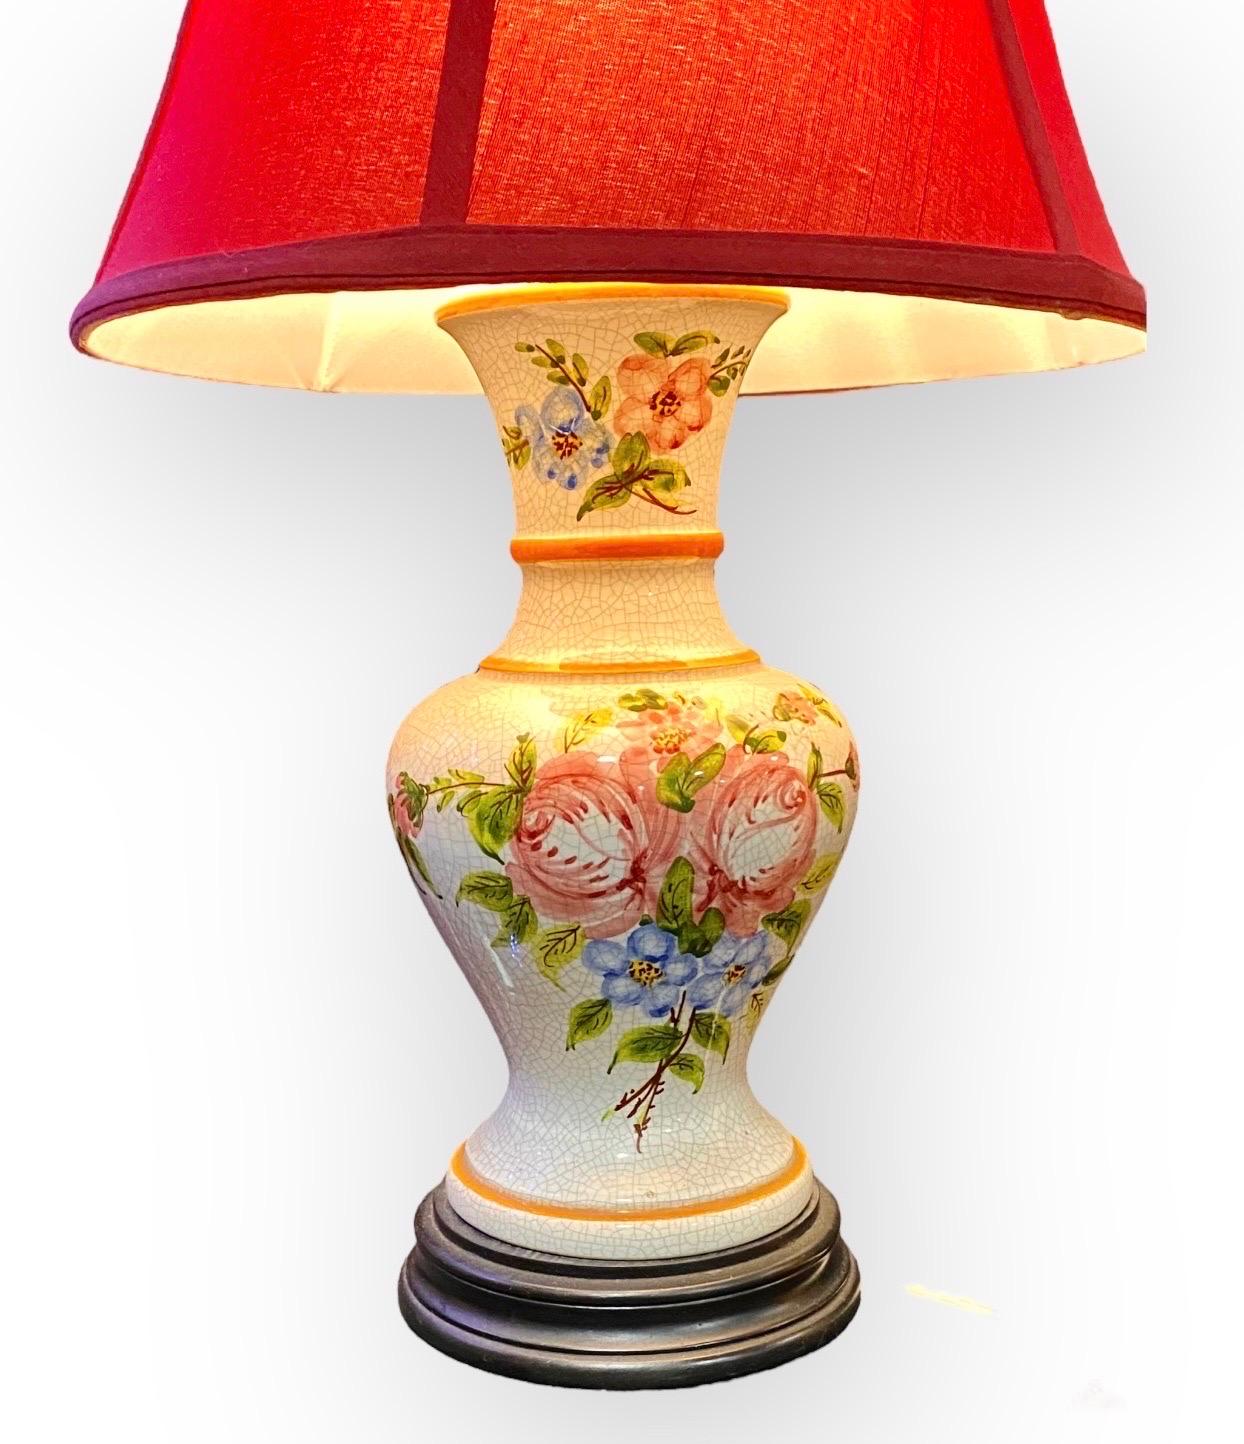 French Provincial Vintage French Faience Table Lamp For Sale